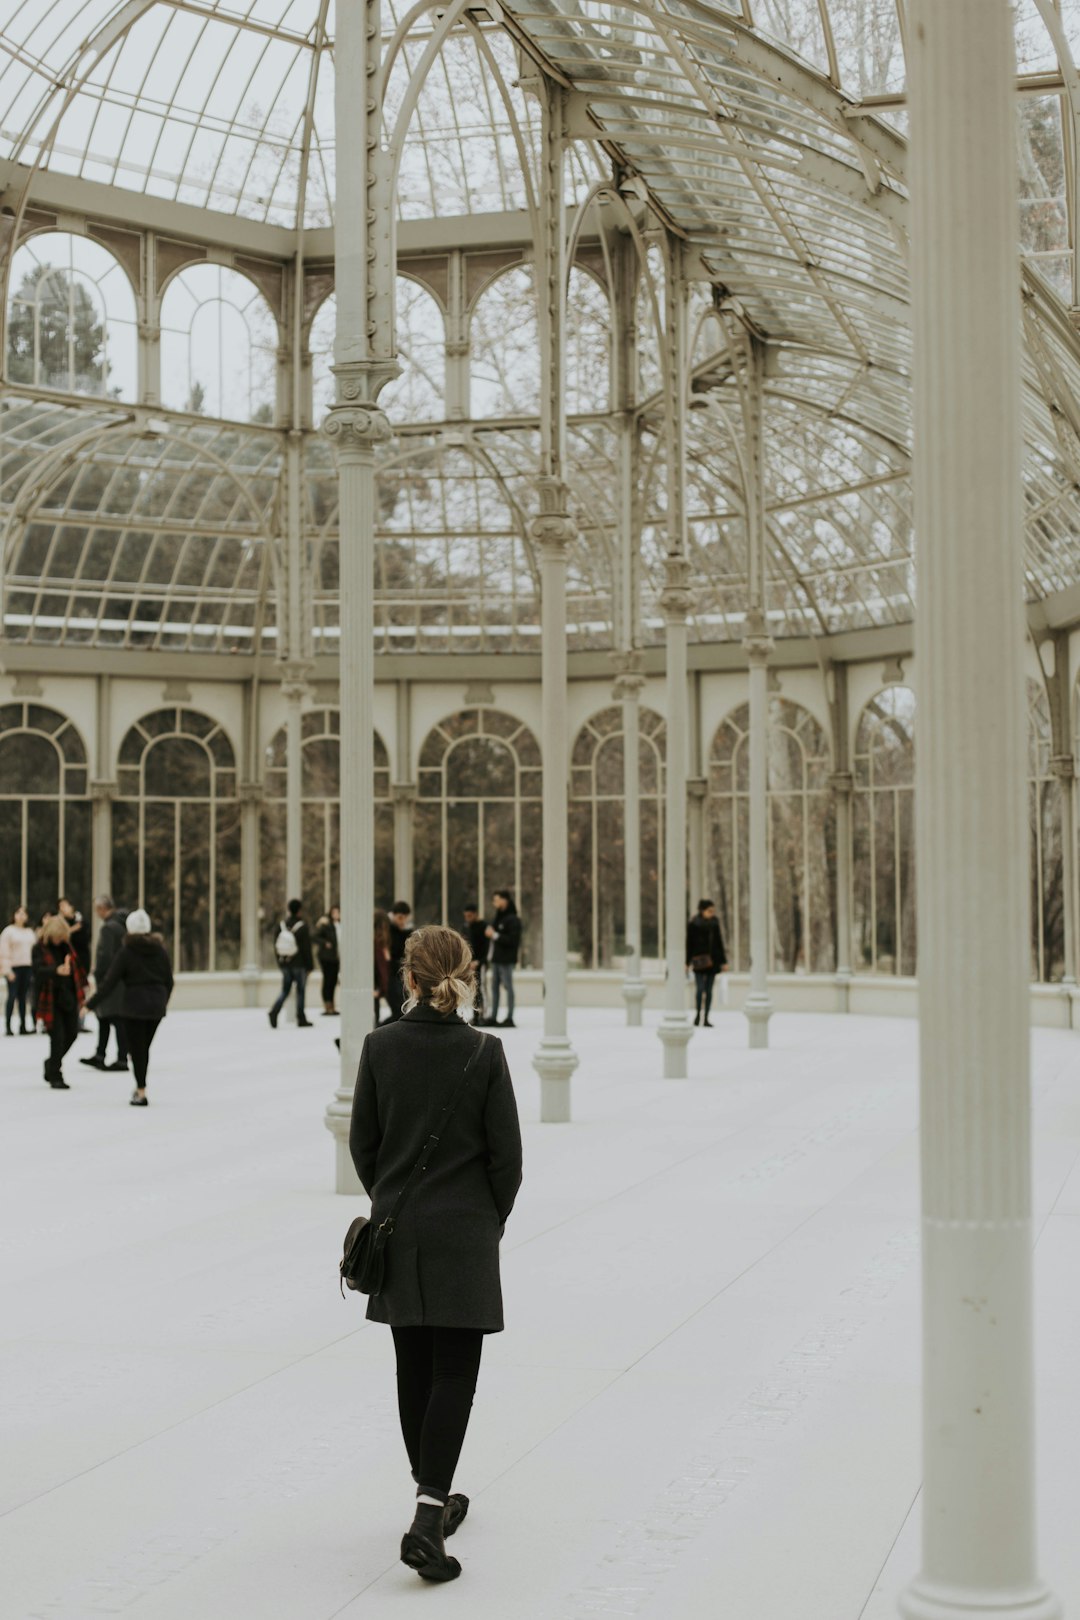 travelers stories about Palace in Palacio de Cristal, Spain